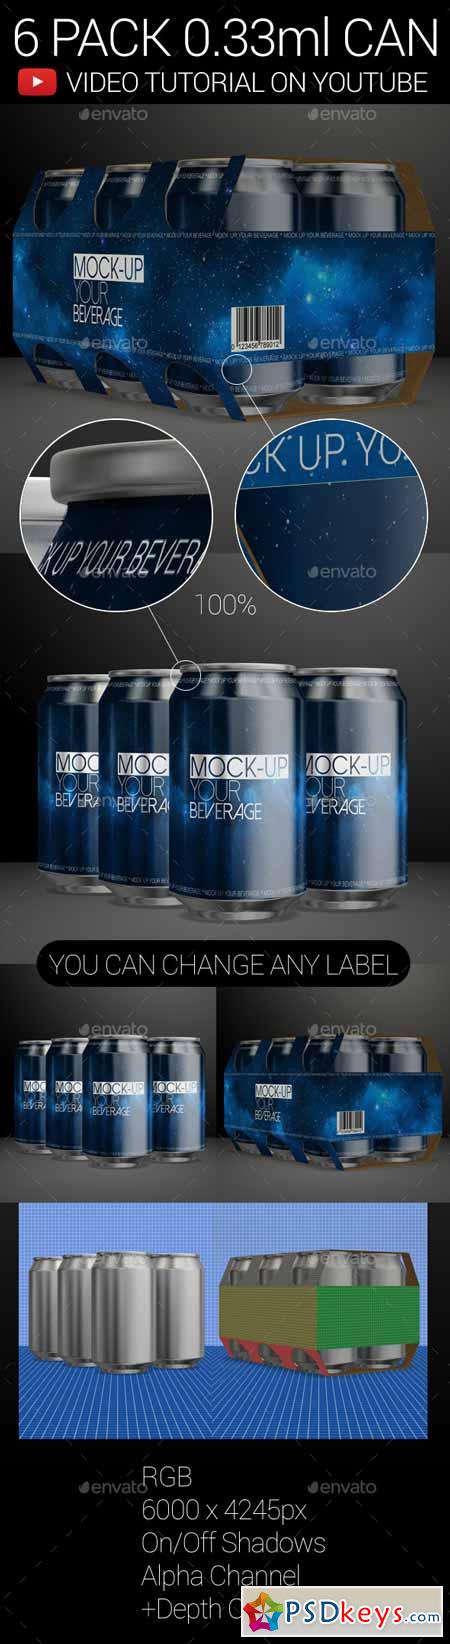 6 Pack 0.33ml Can 02 9961102